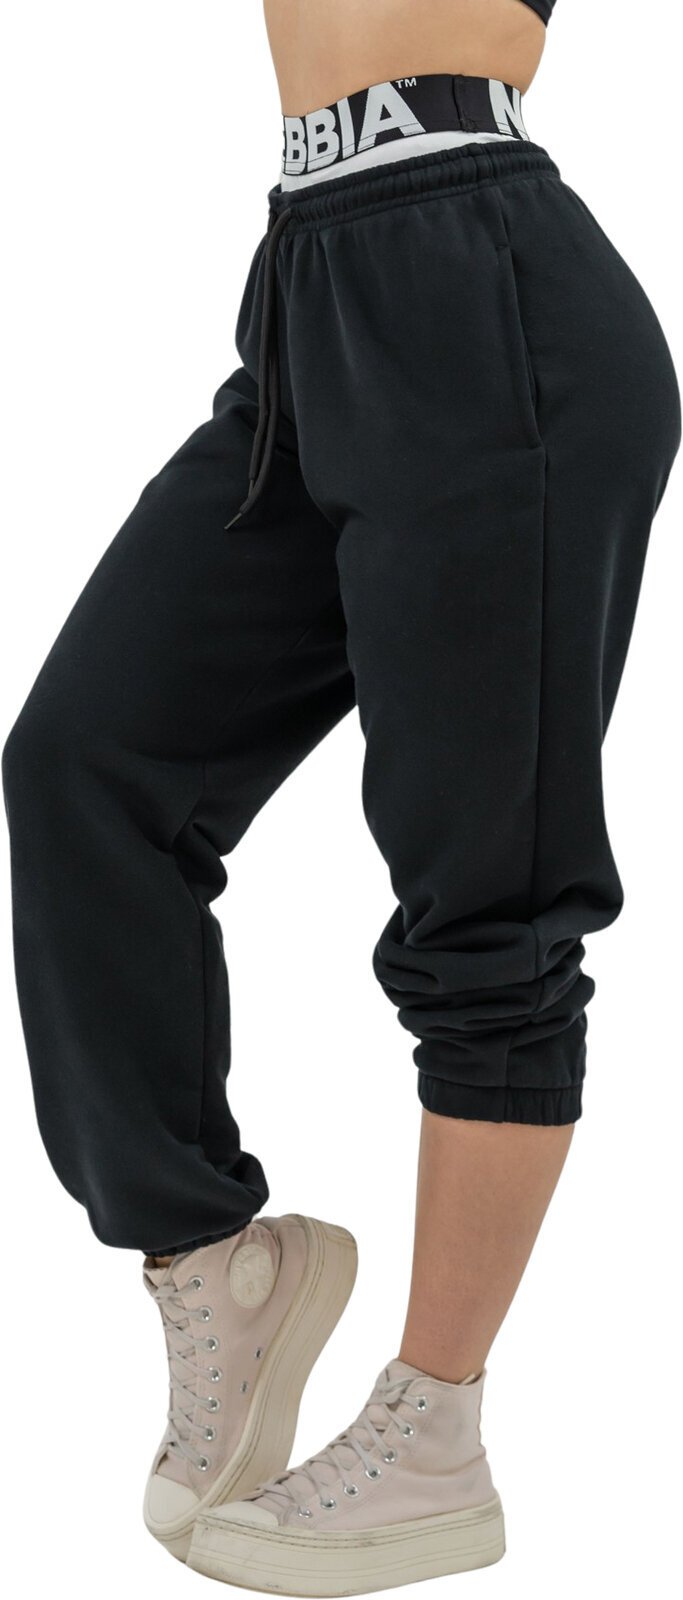 Fitness Trousers Nebbia Fitness Sweatpants Muscle Mommy Black L Fitness Trousers